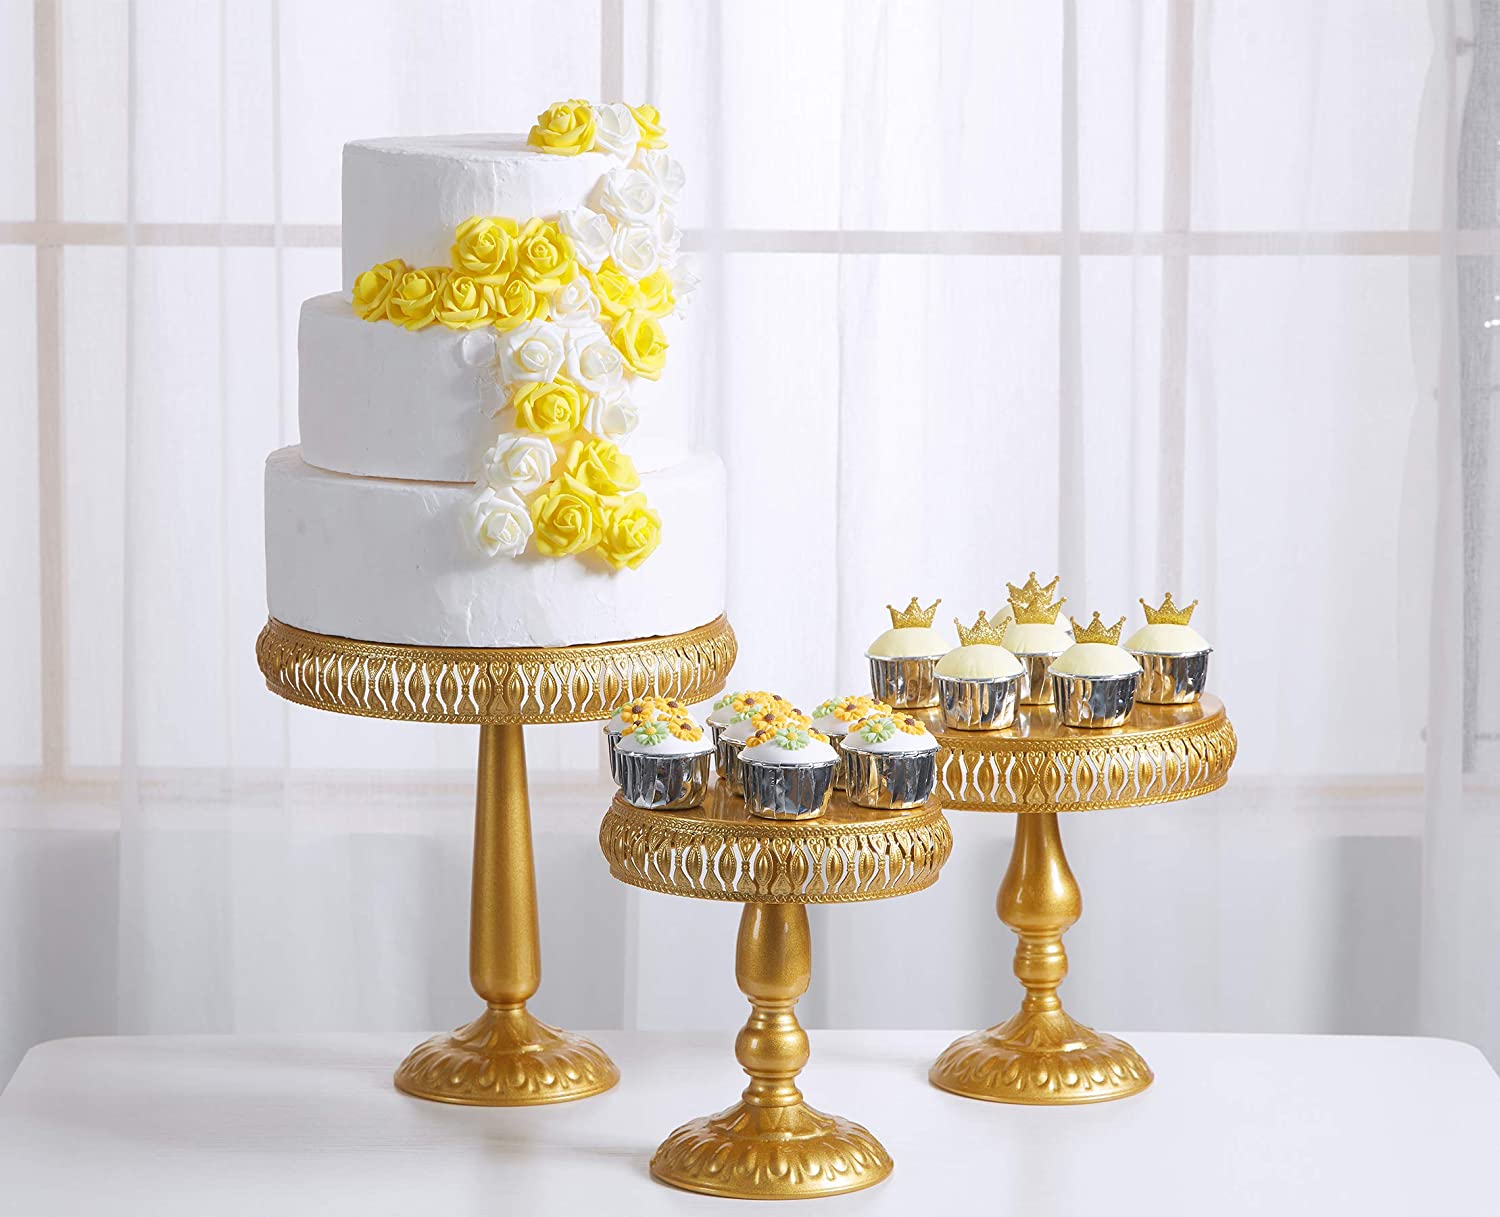 3 tier cake stands